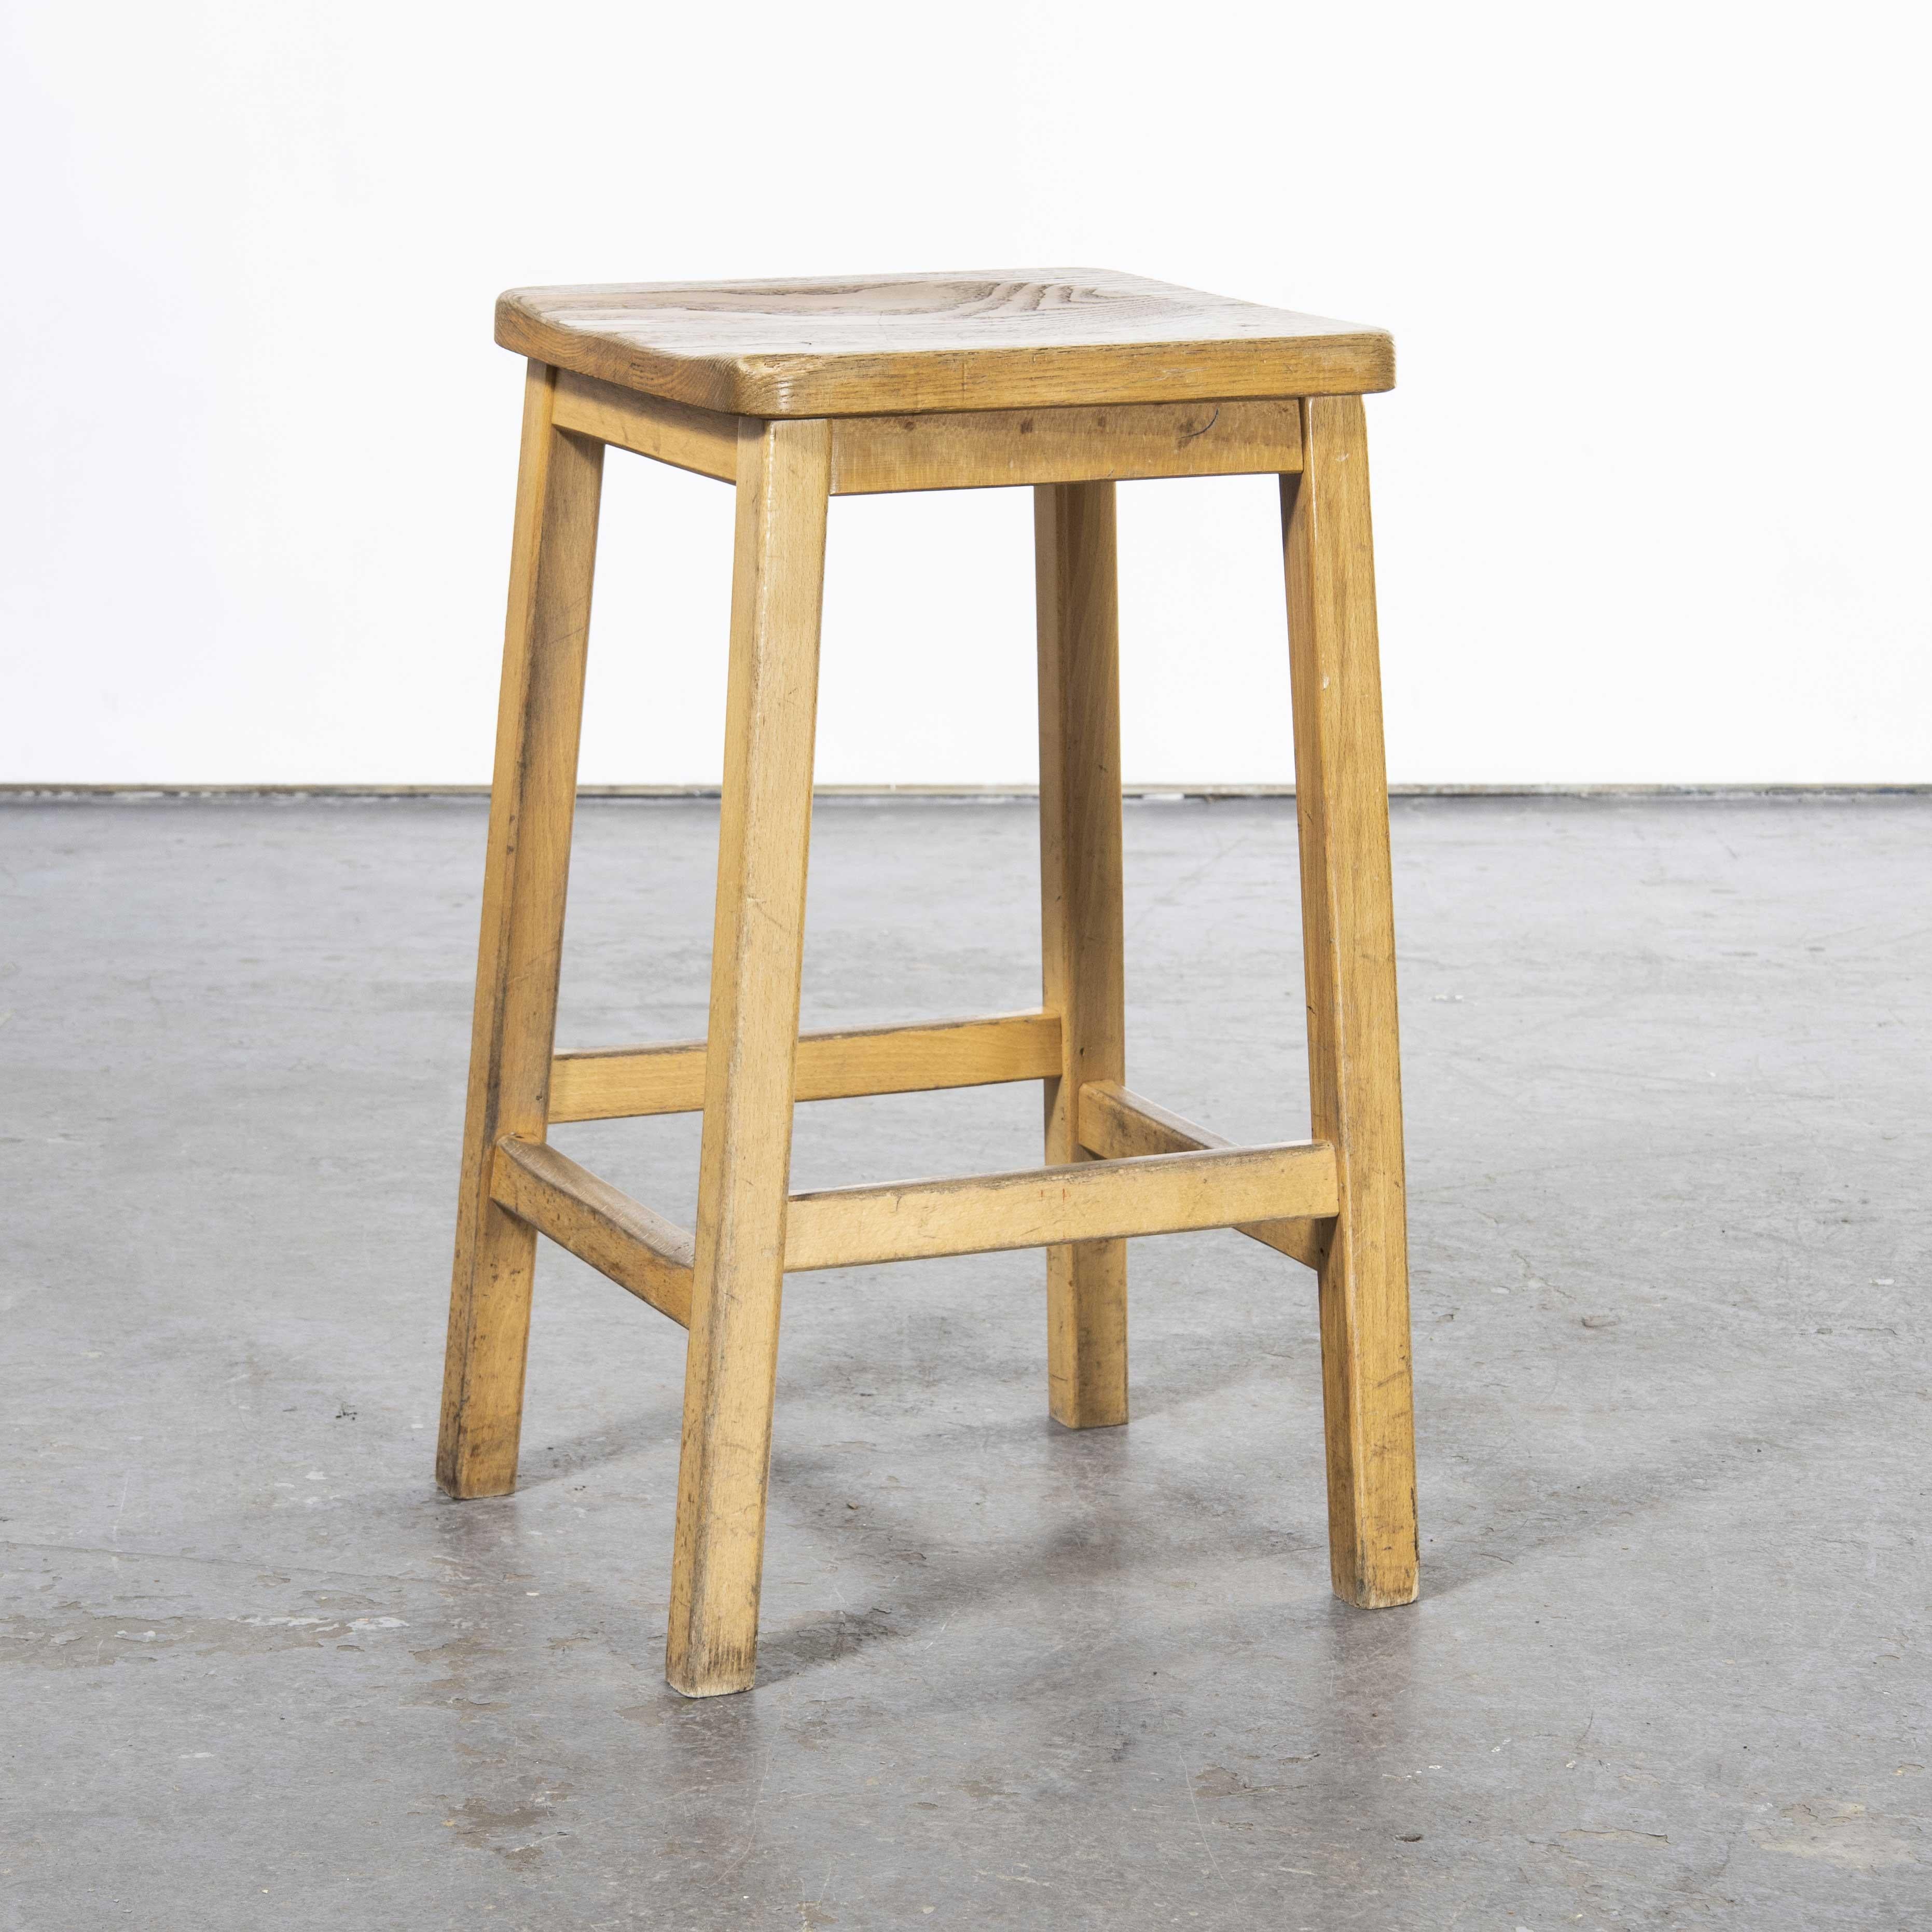 French 1950's English Oak School Laboratory High Stools, Large Quantities Available